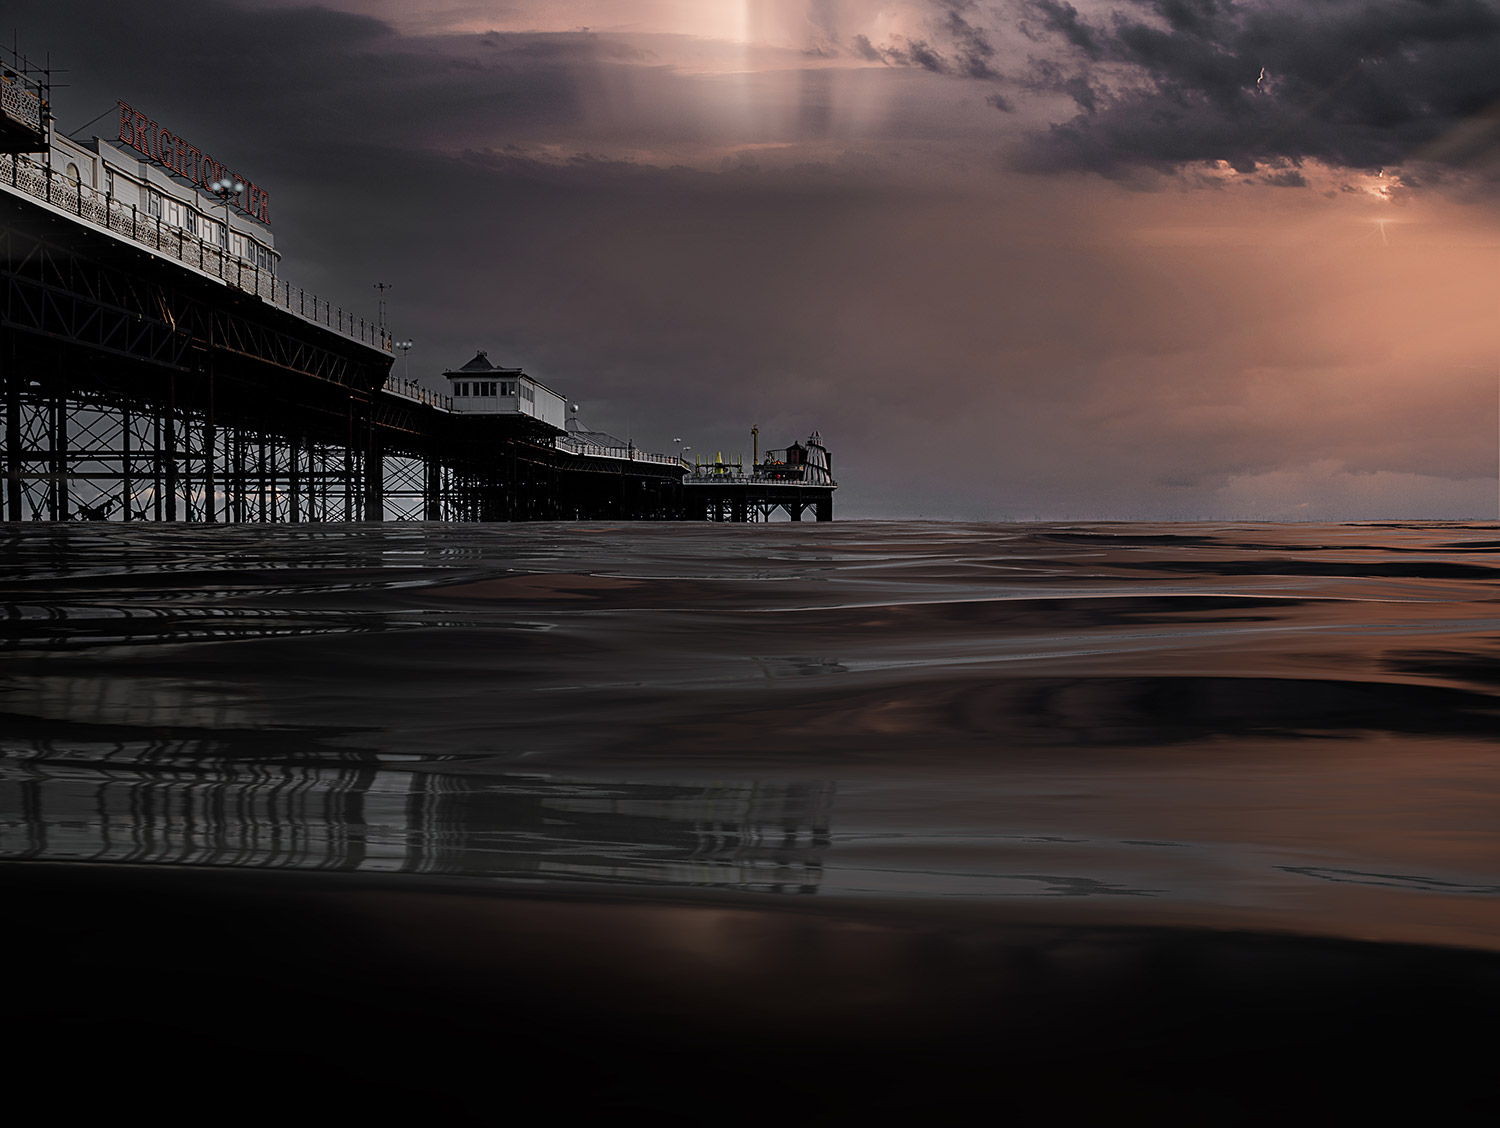 Palace Pier sunburst behind the storm clouds by Brian Roe